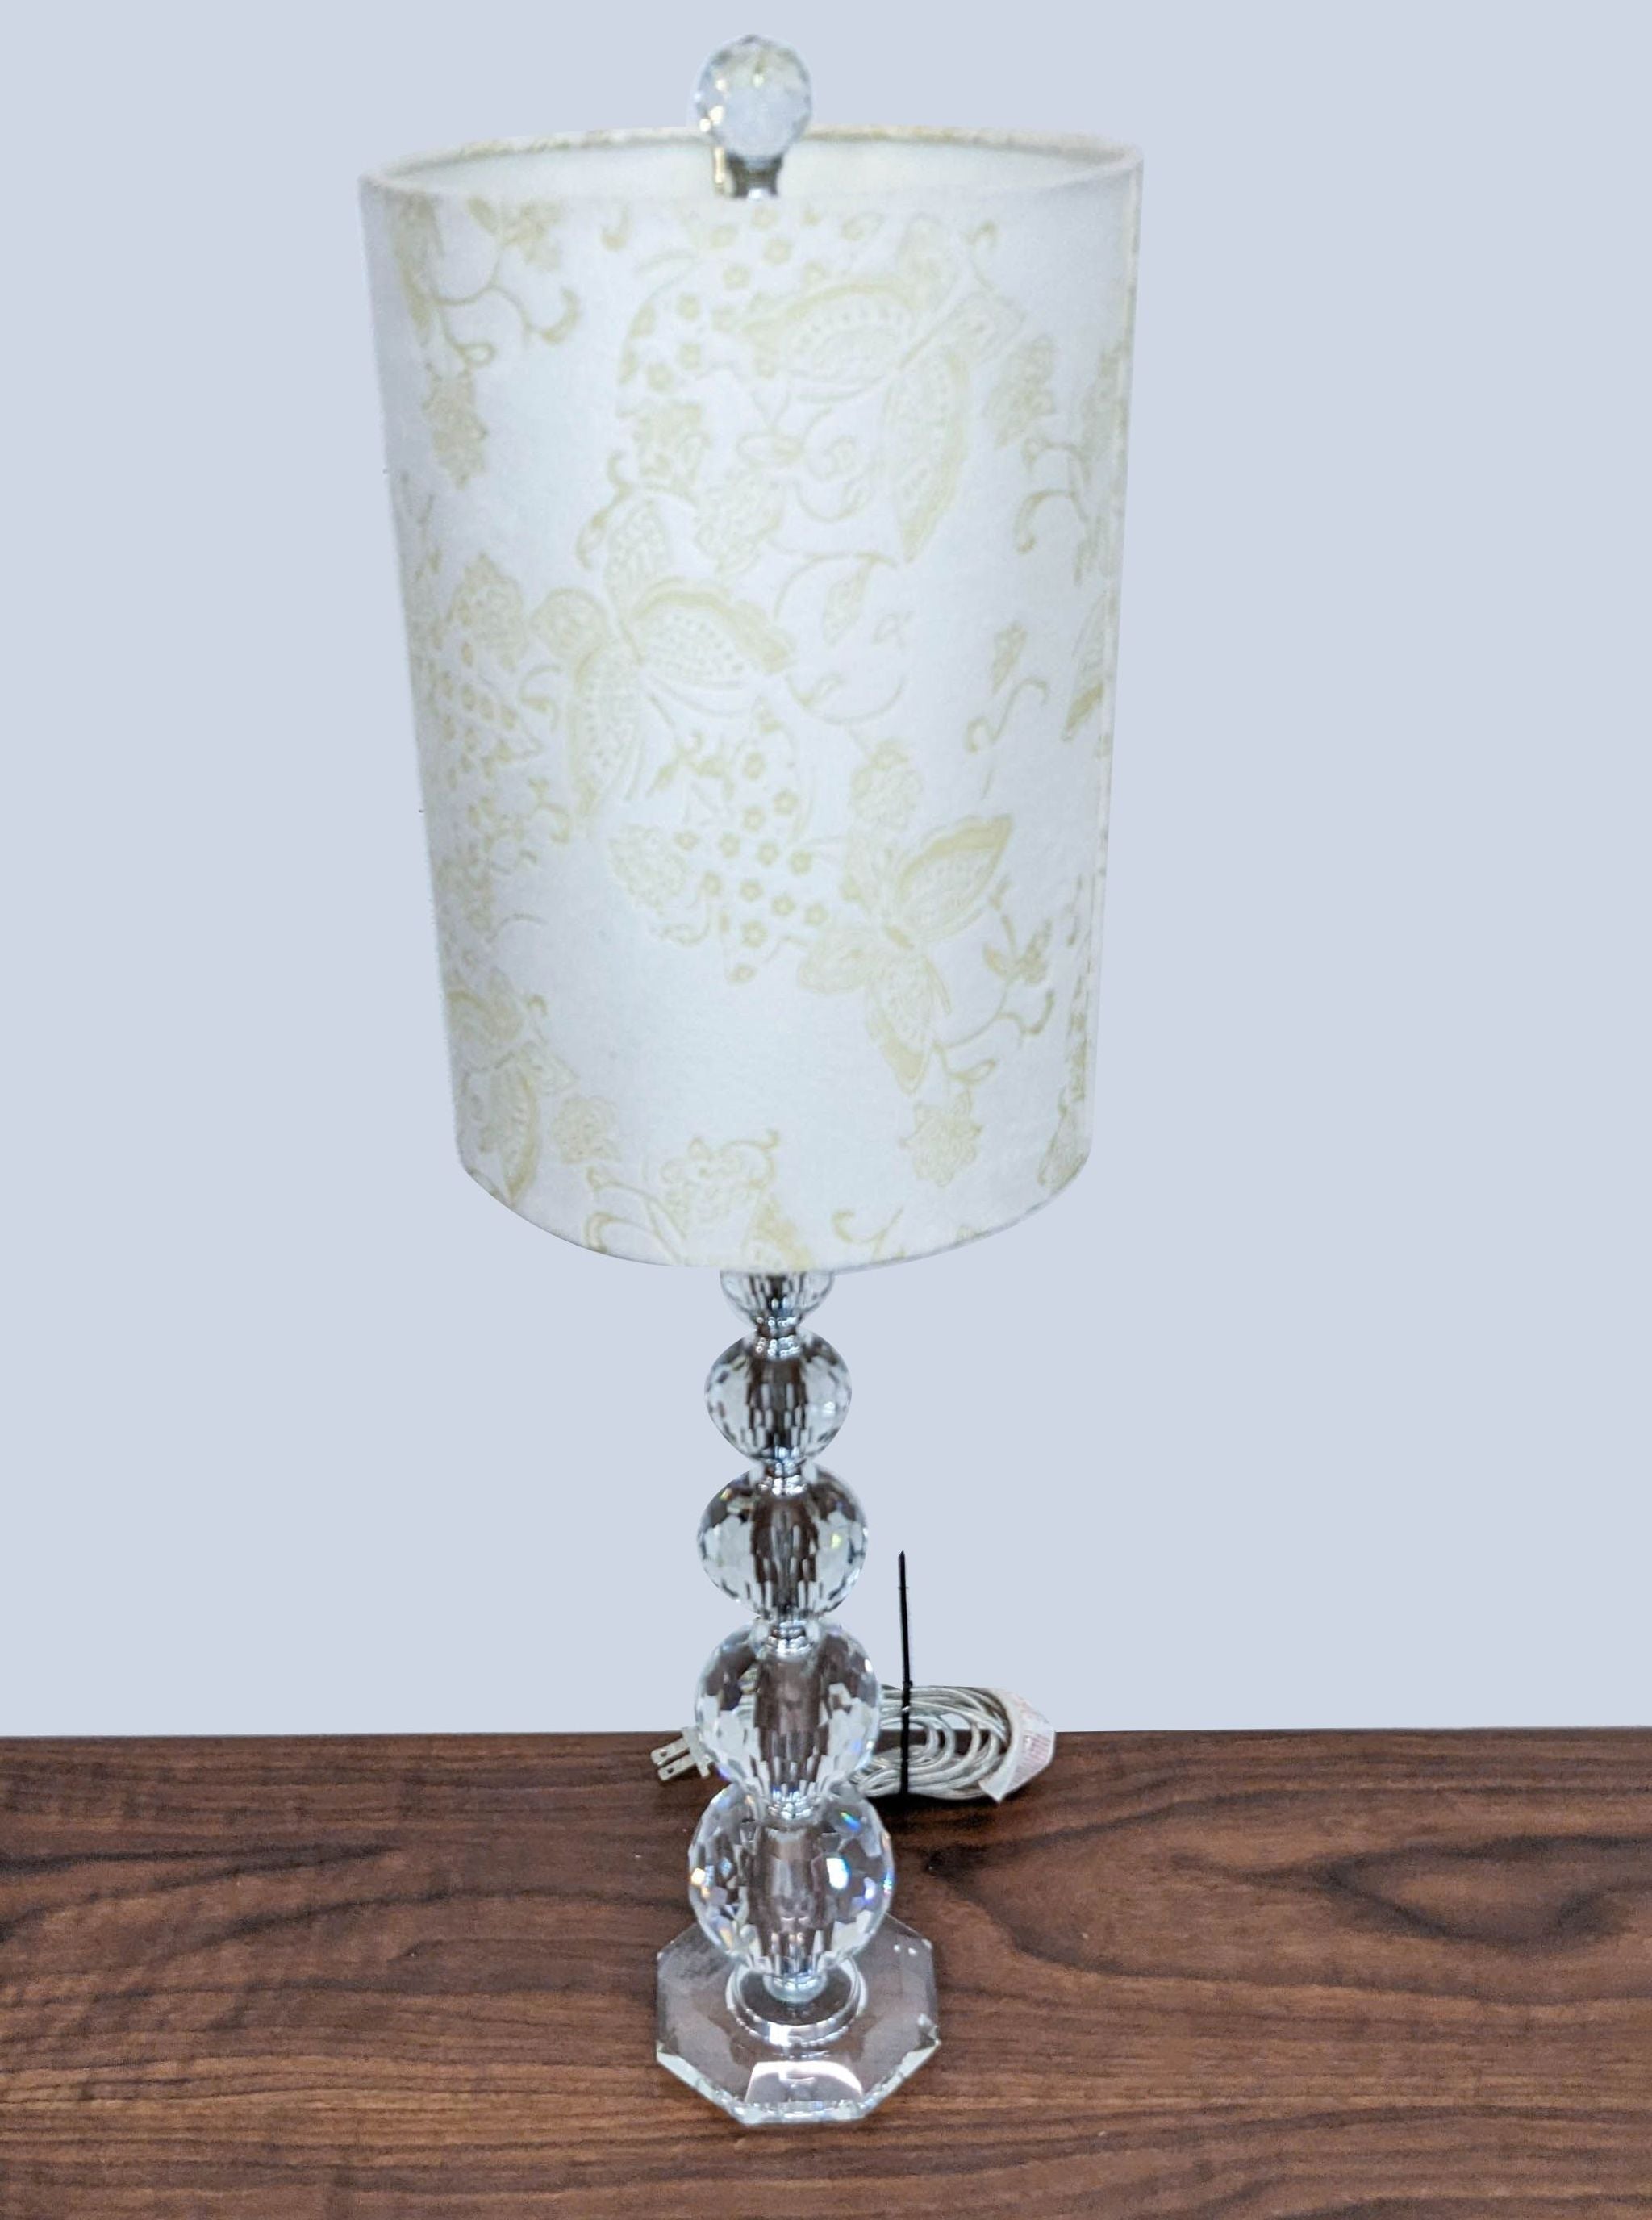 Reperch brand table lamp with floral-patterned shade and crystal base on wooden surface.